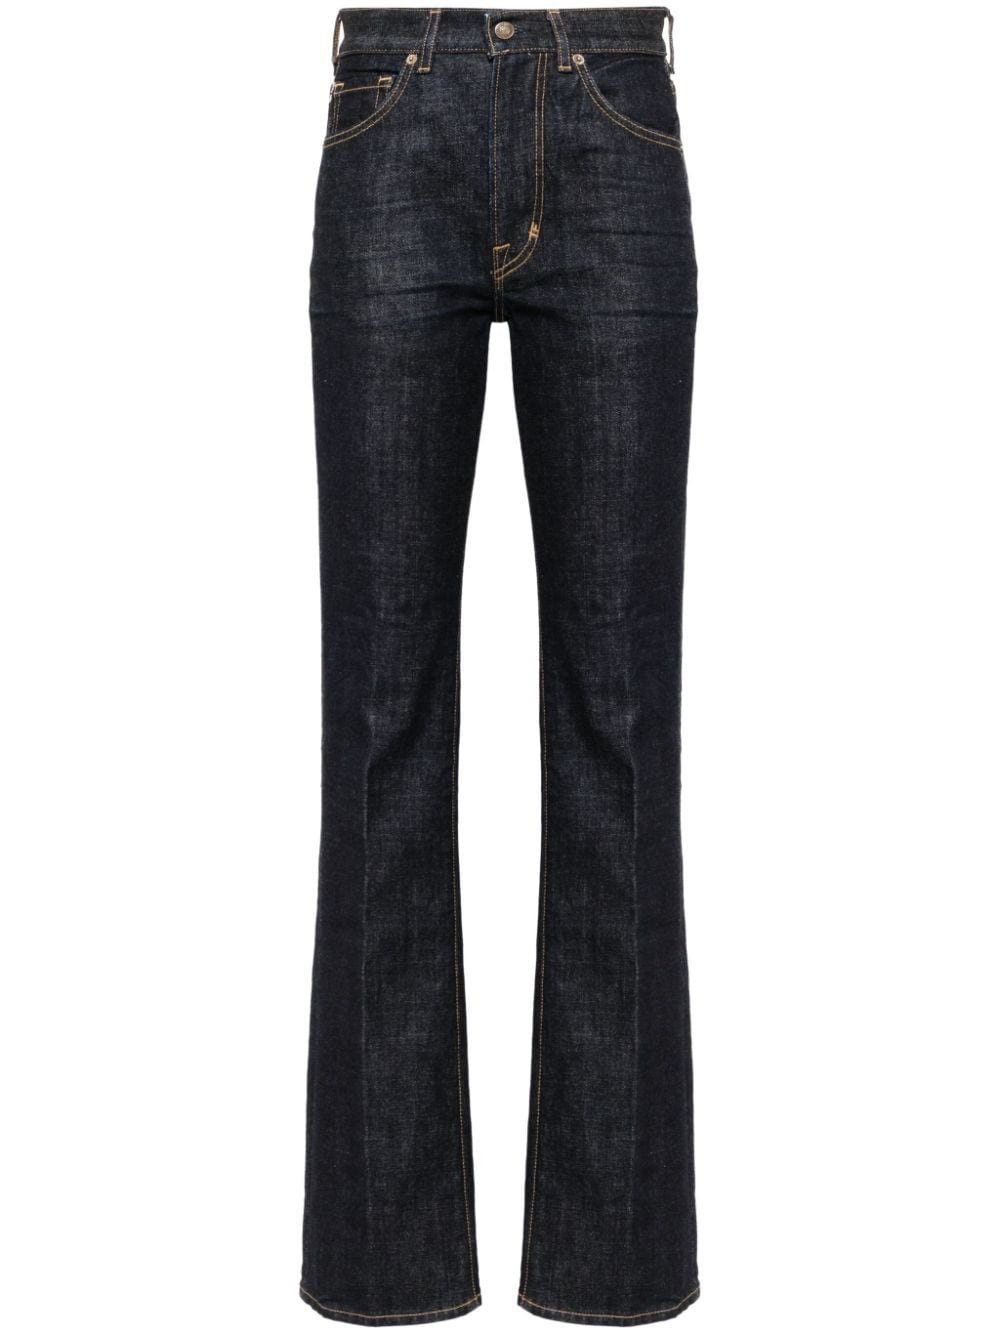 TOM FORD Flared jeans Blauw